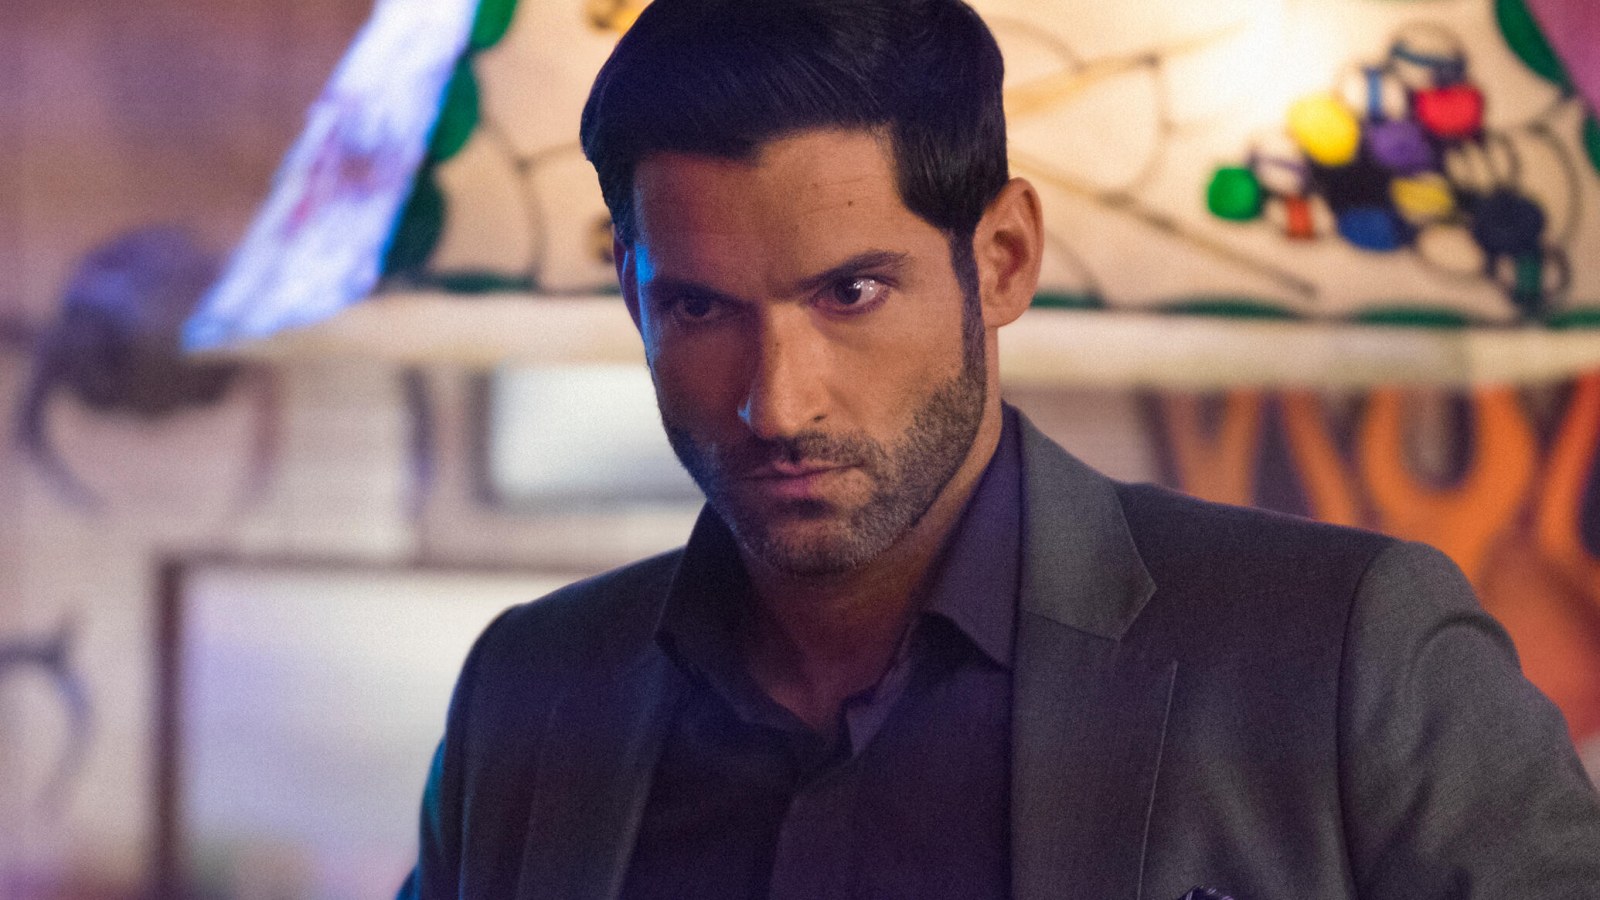 Lucifer season 5 part 2: New episodes of Lucifer released on